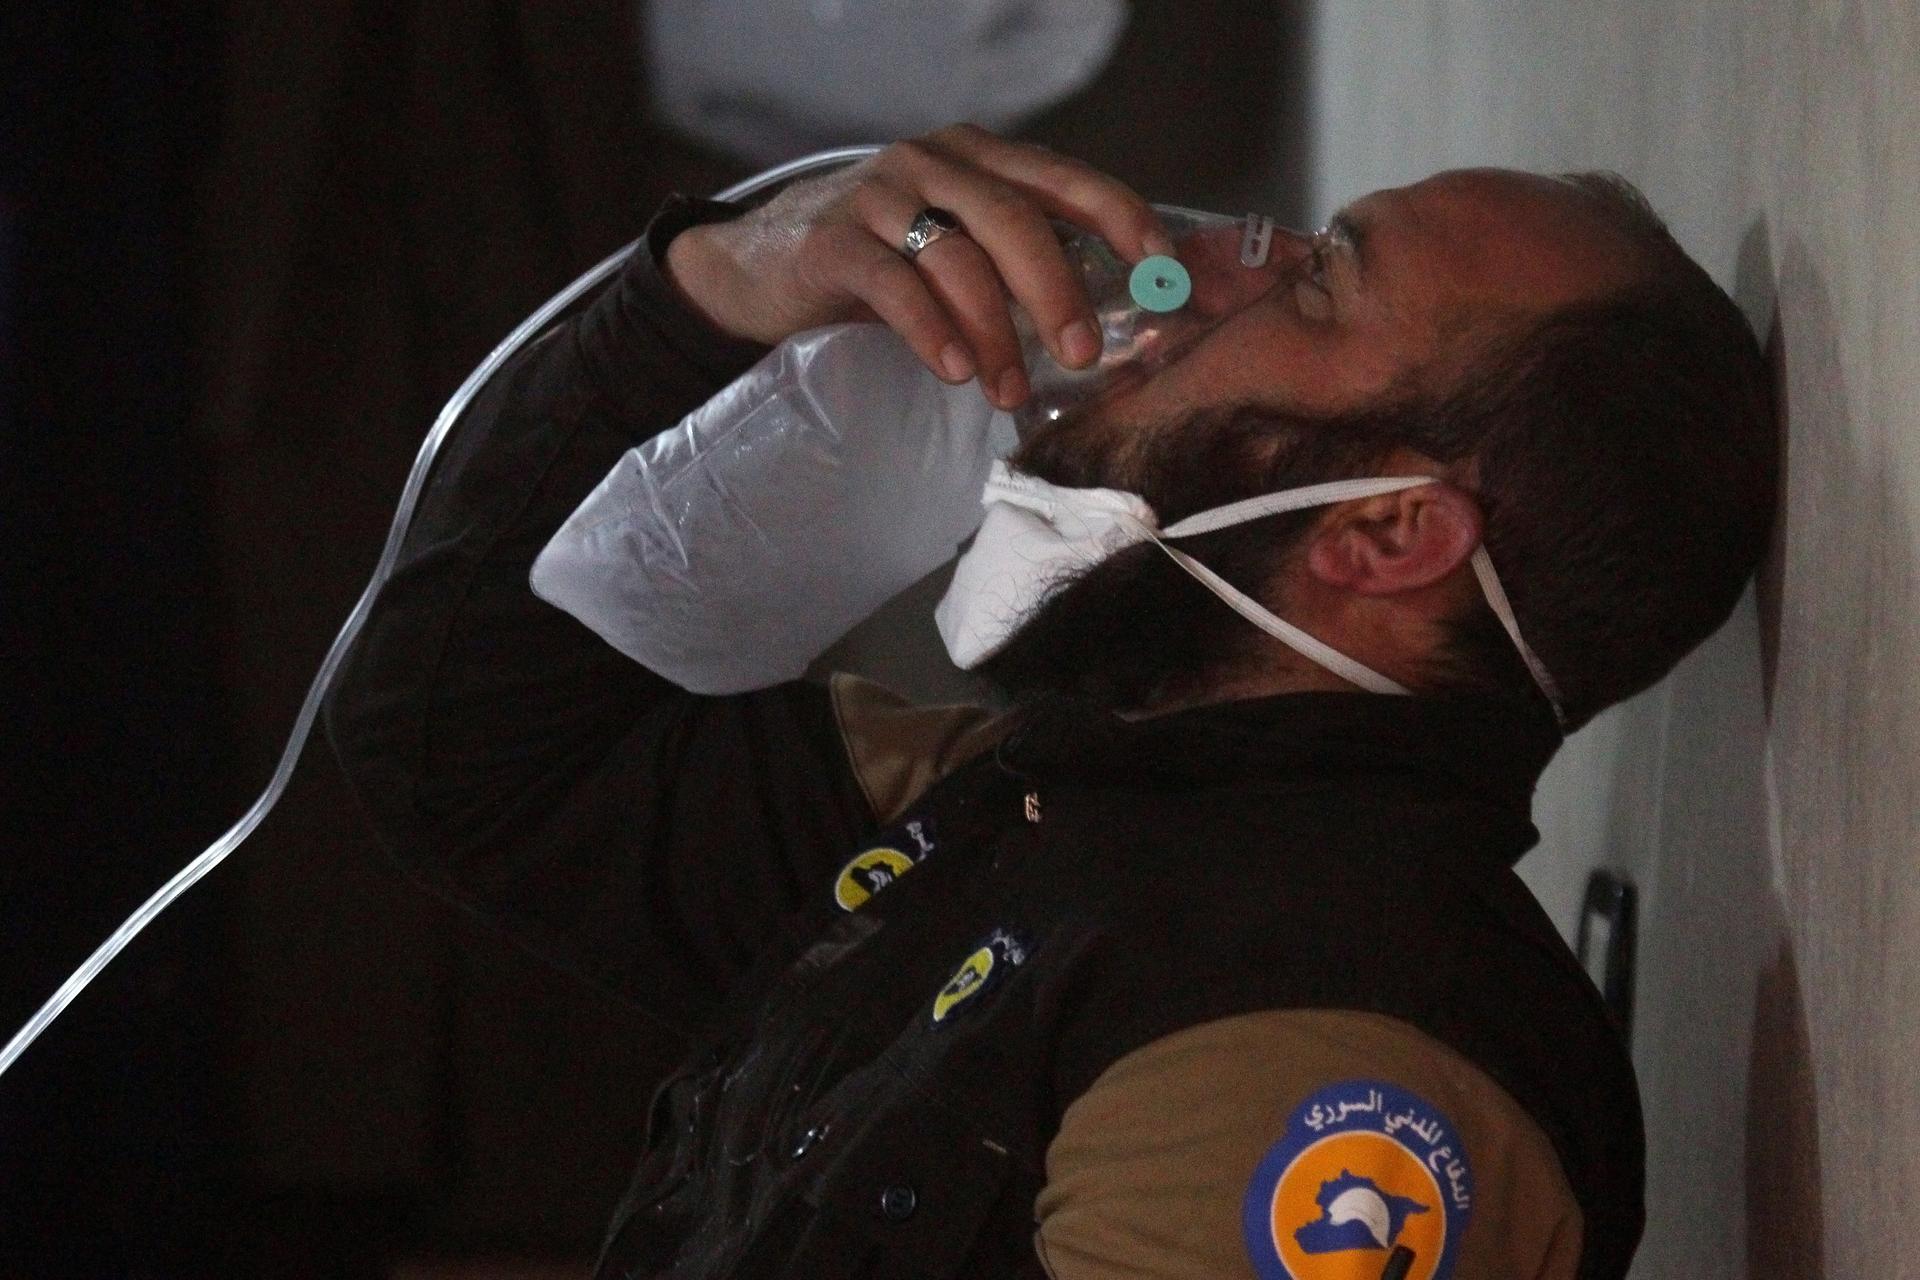 A Syrian civil defence member uses an oxygen mask after a suspected gas attack in the town of Khan Sheikhoun in rebel-held Idlib.